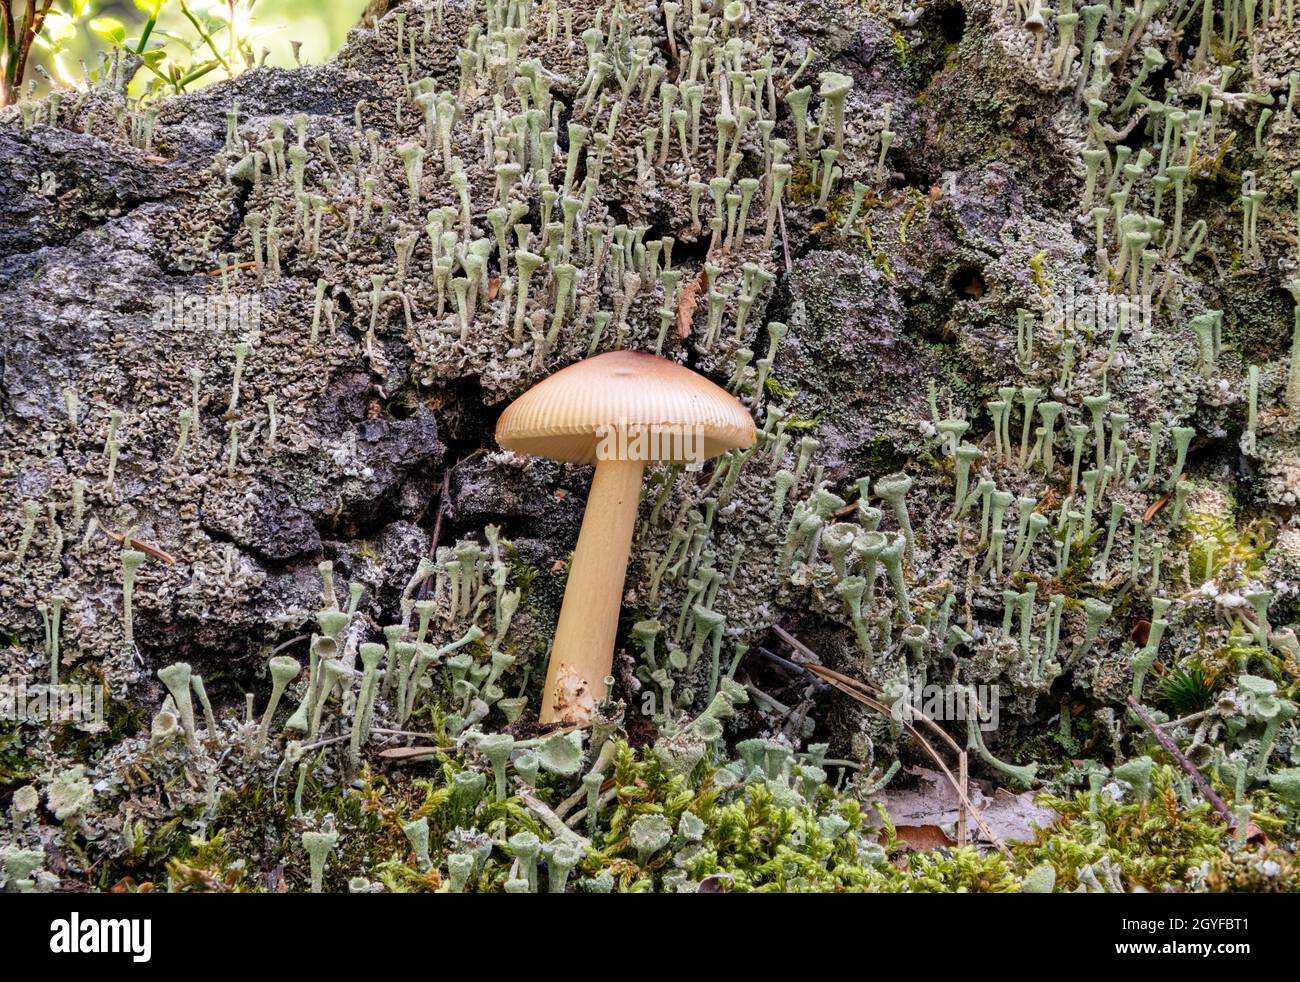 Detail of a single common bonnet mushroom against a background of trumpet lichen Stock Photo